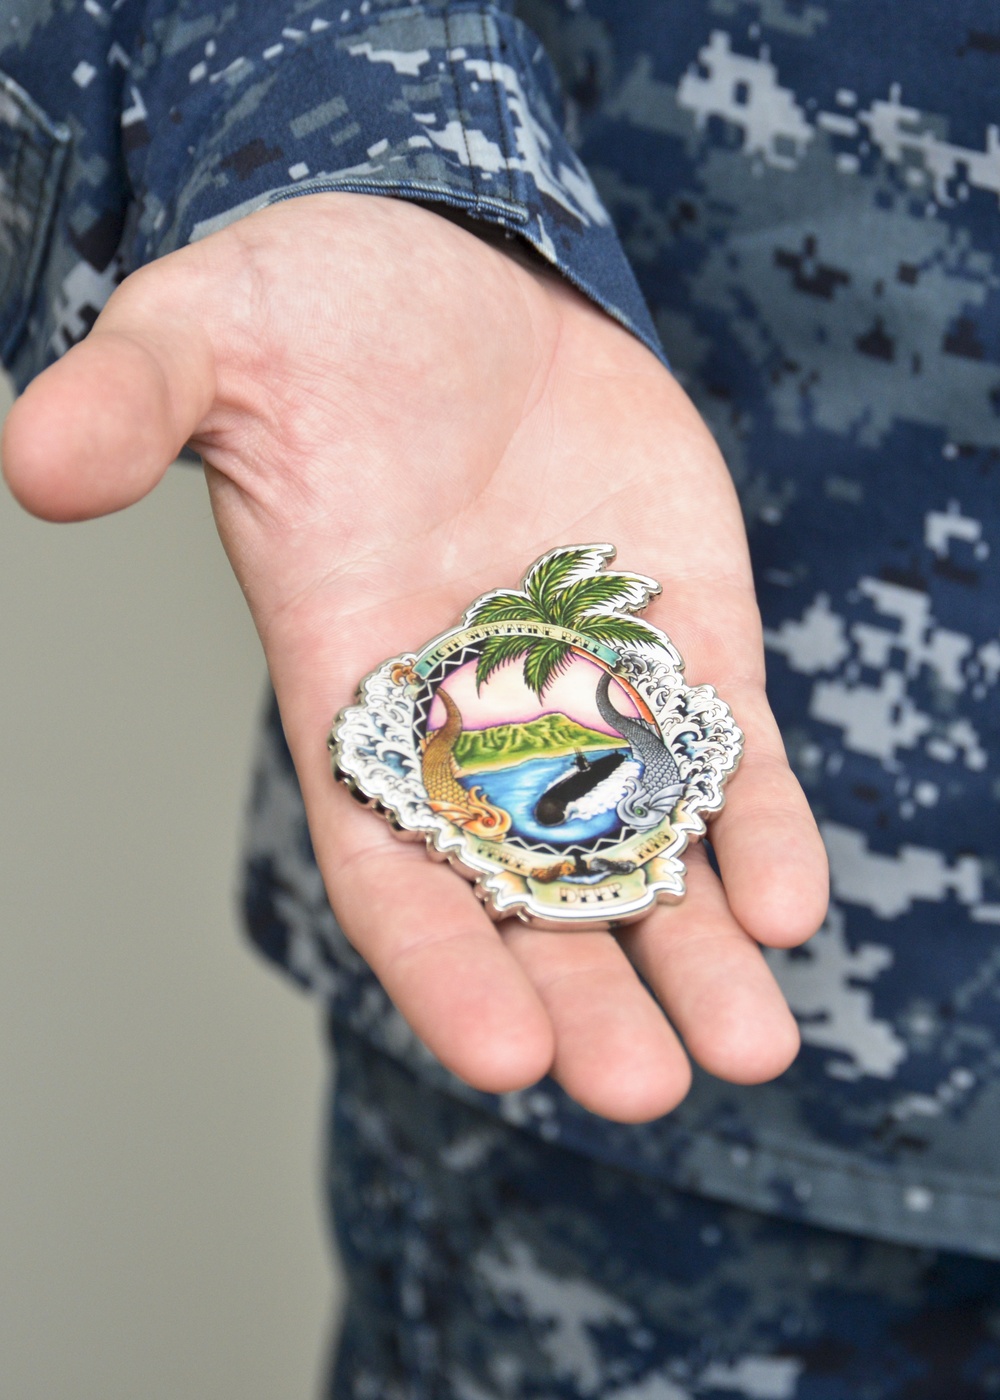 DVIDS Images 116th Submarine Ball Coins [Image 1 of 4]